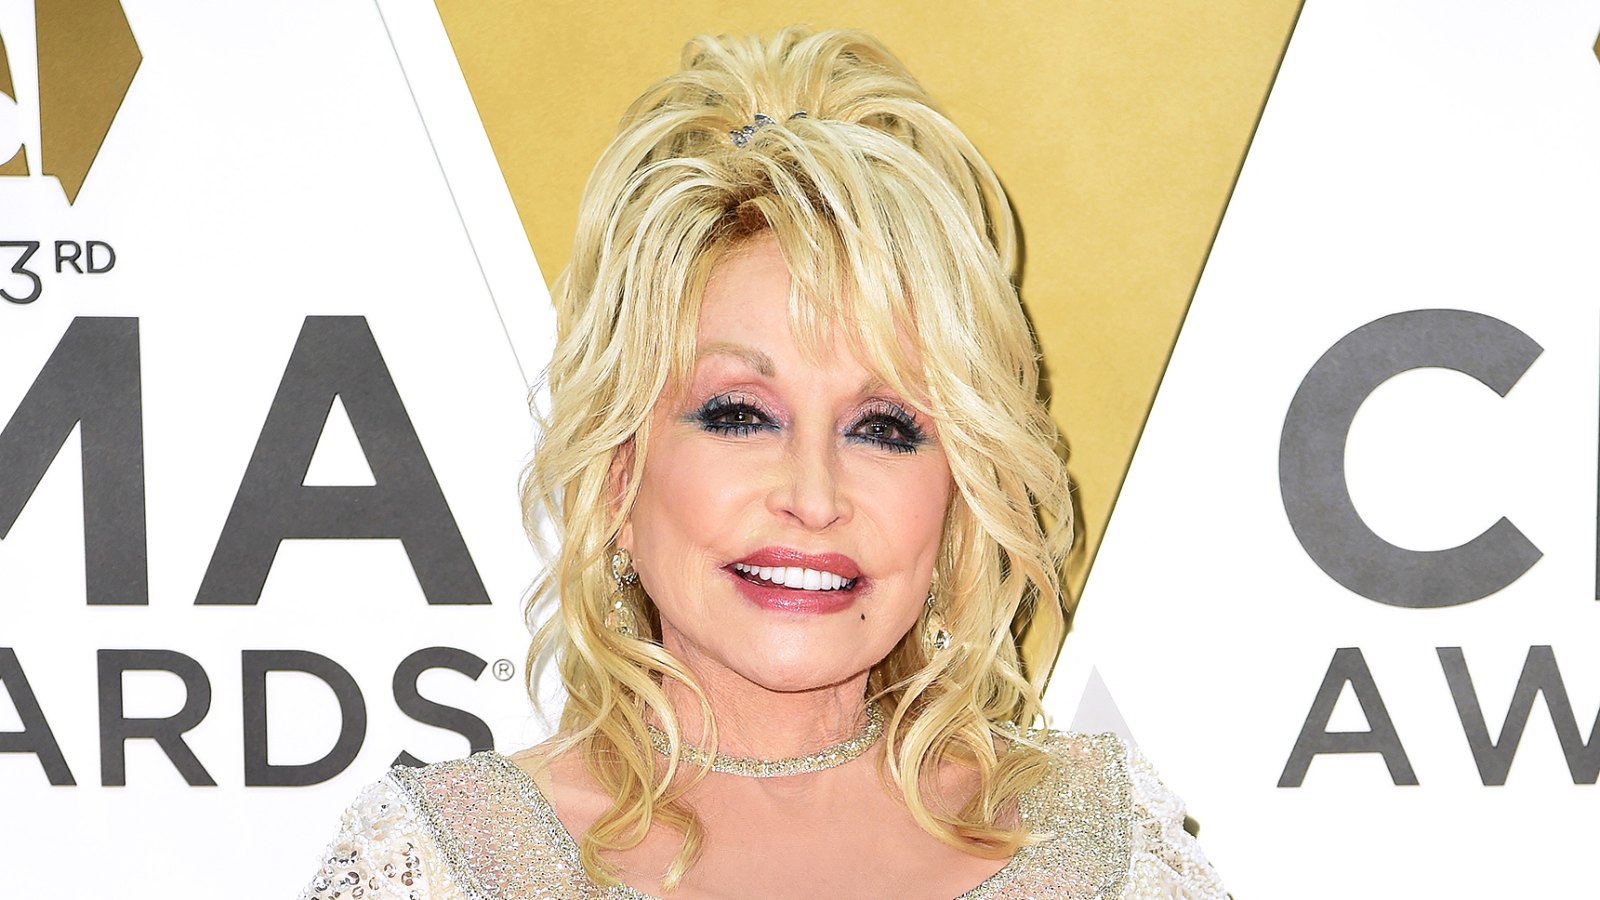 Dolly Parton Explains Why She Keeps Husband Carl Dean Out of the Limelight